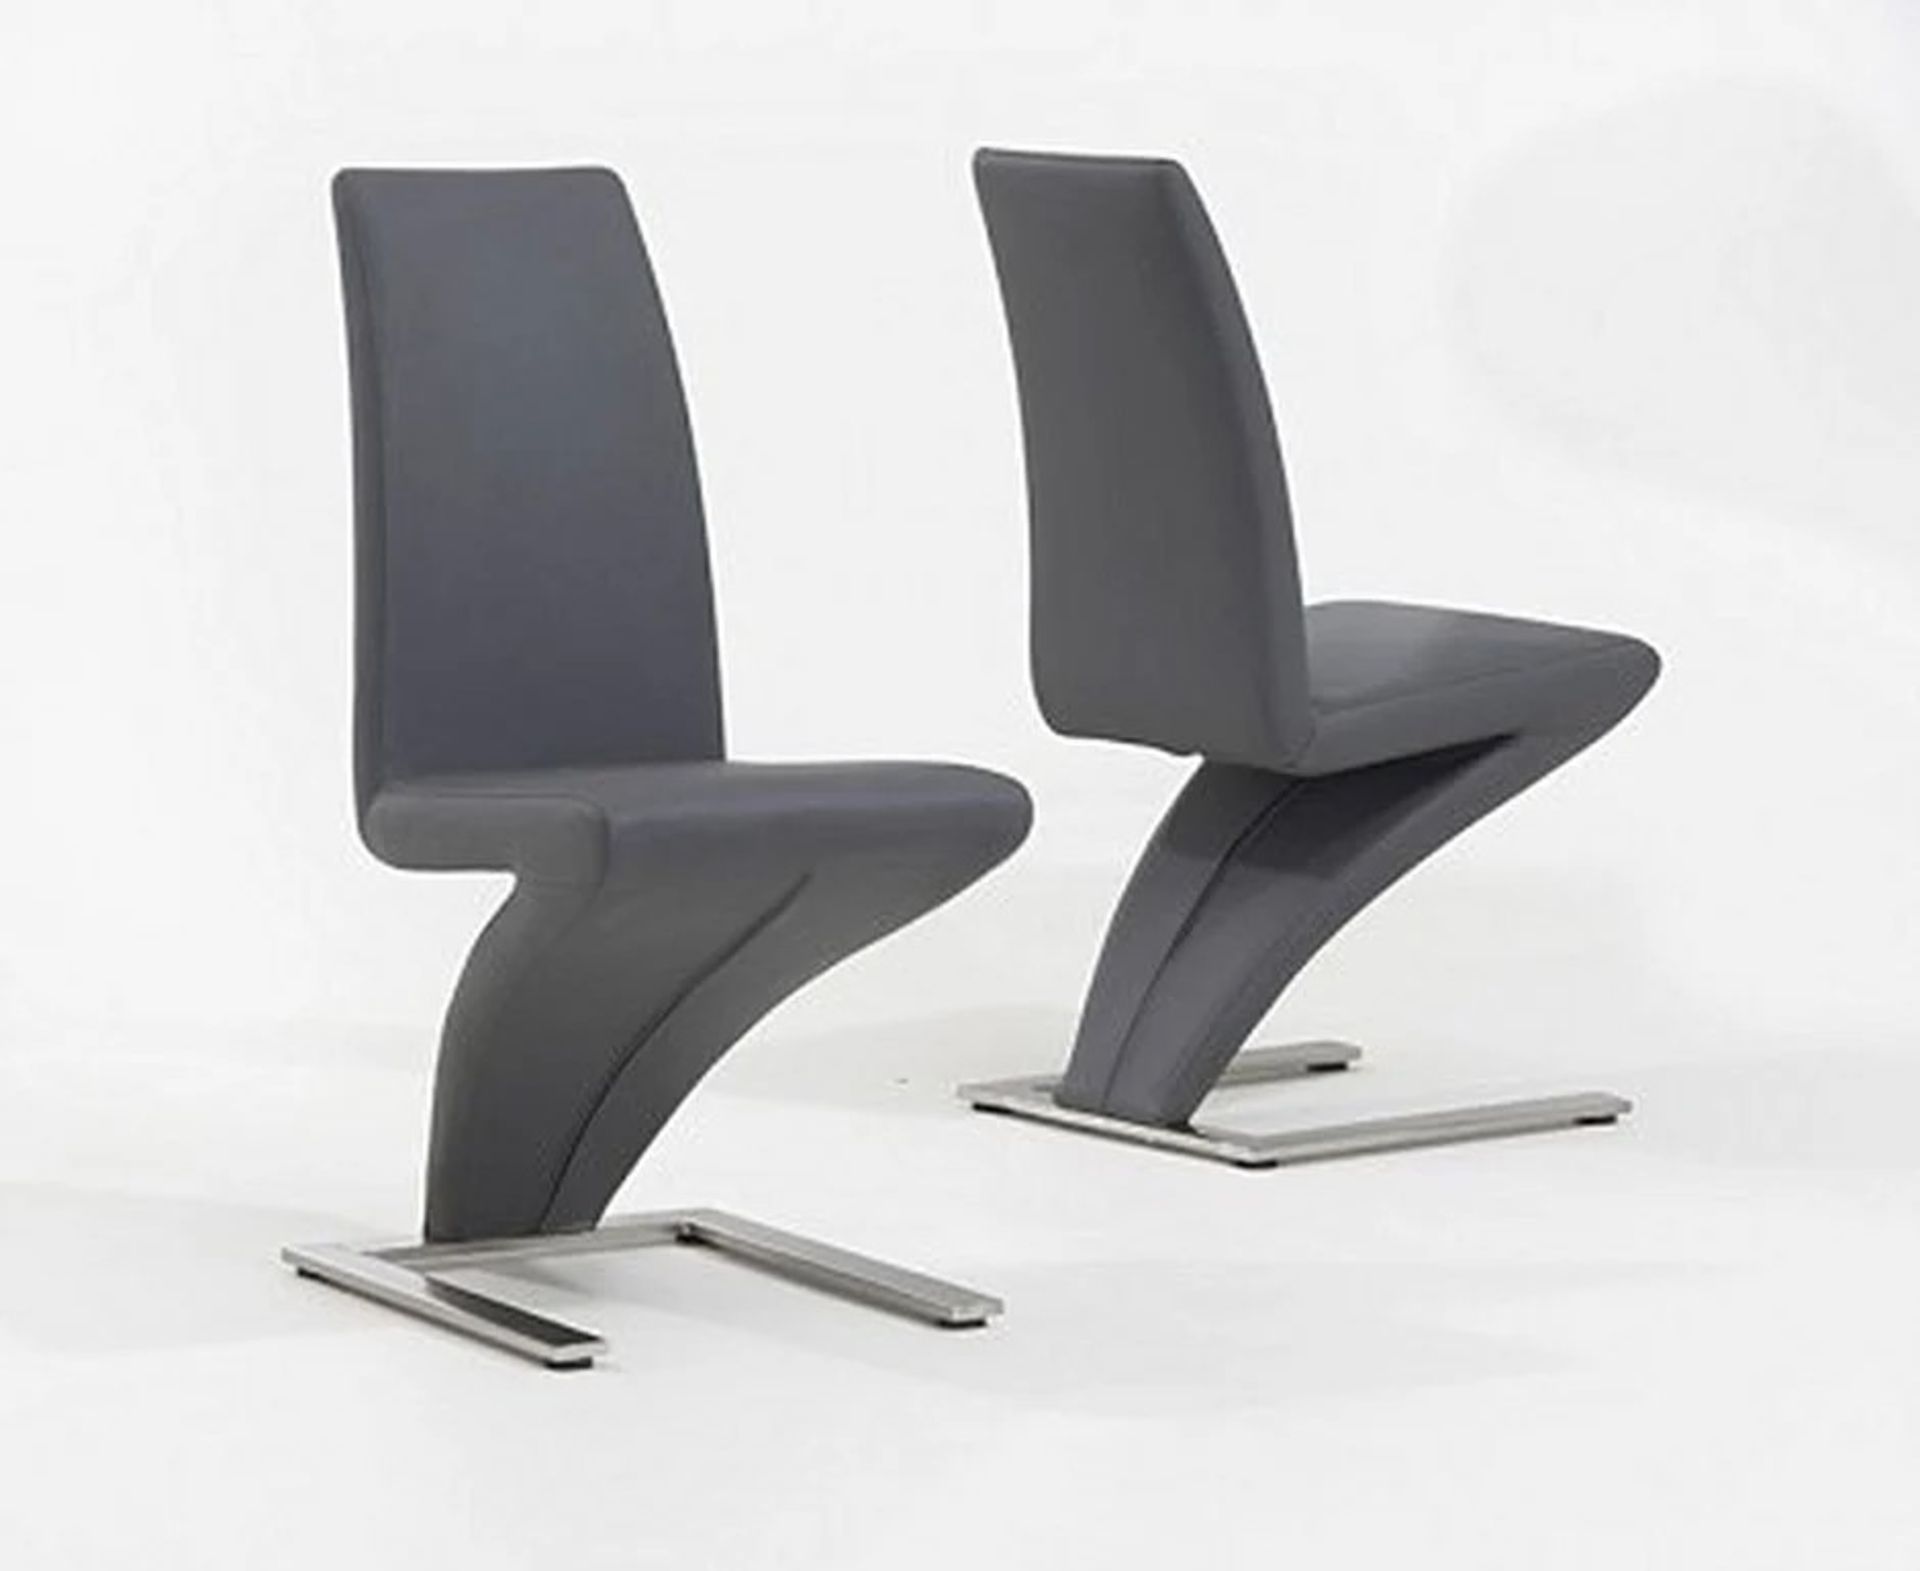 A set of 2 x Hampstead Z Grey Faux Leather Dining Chairs striking chrome and faux leather design